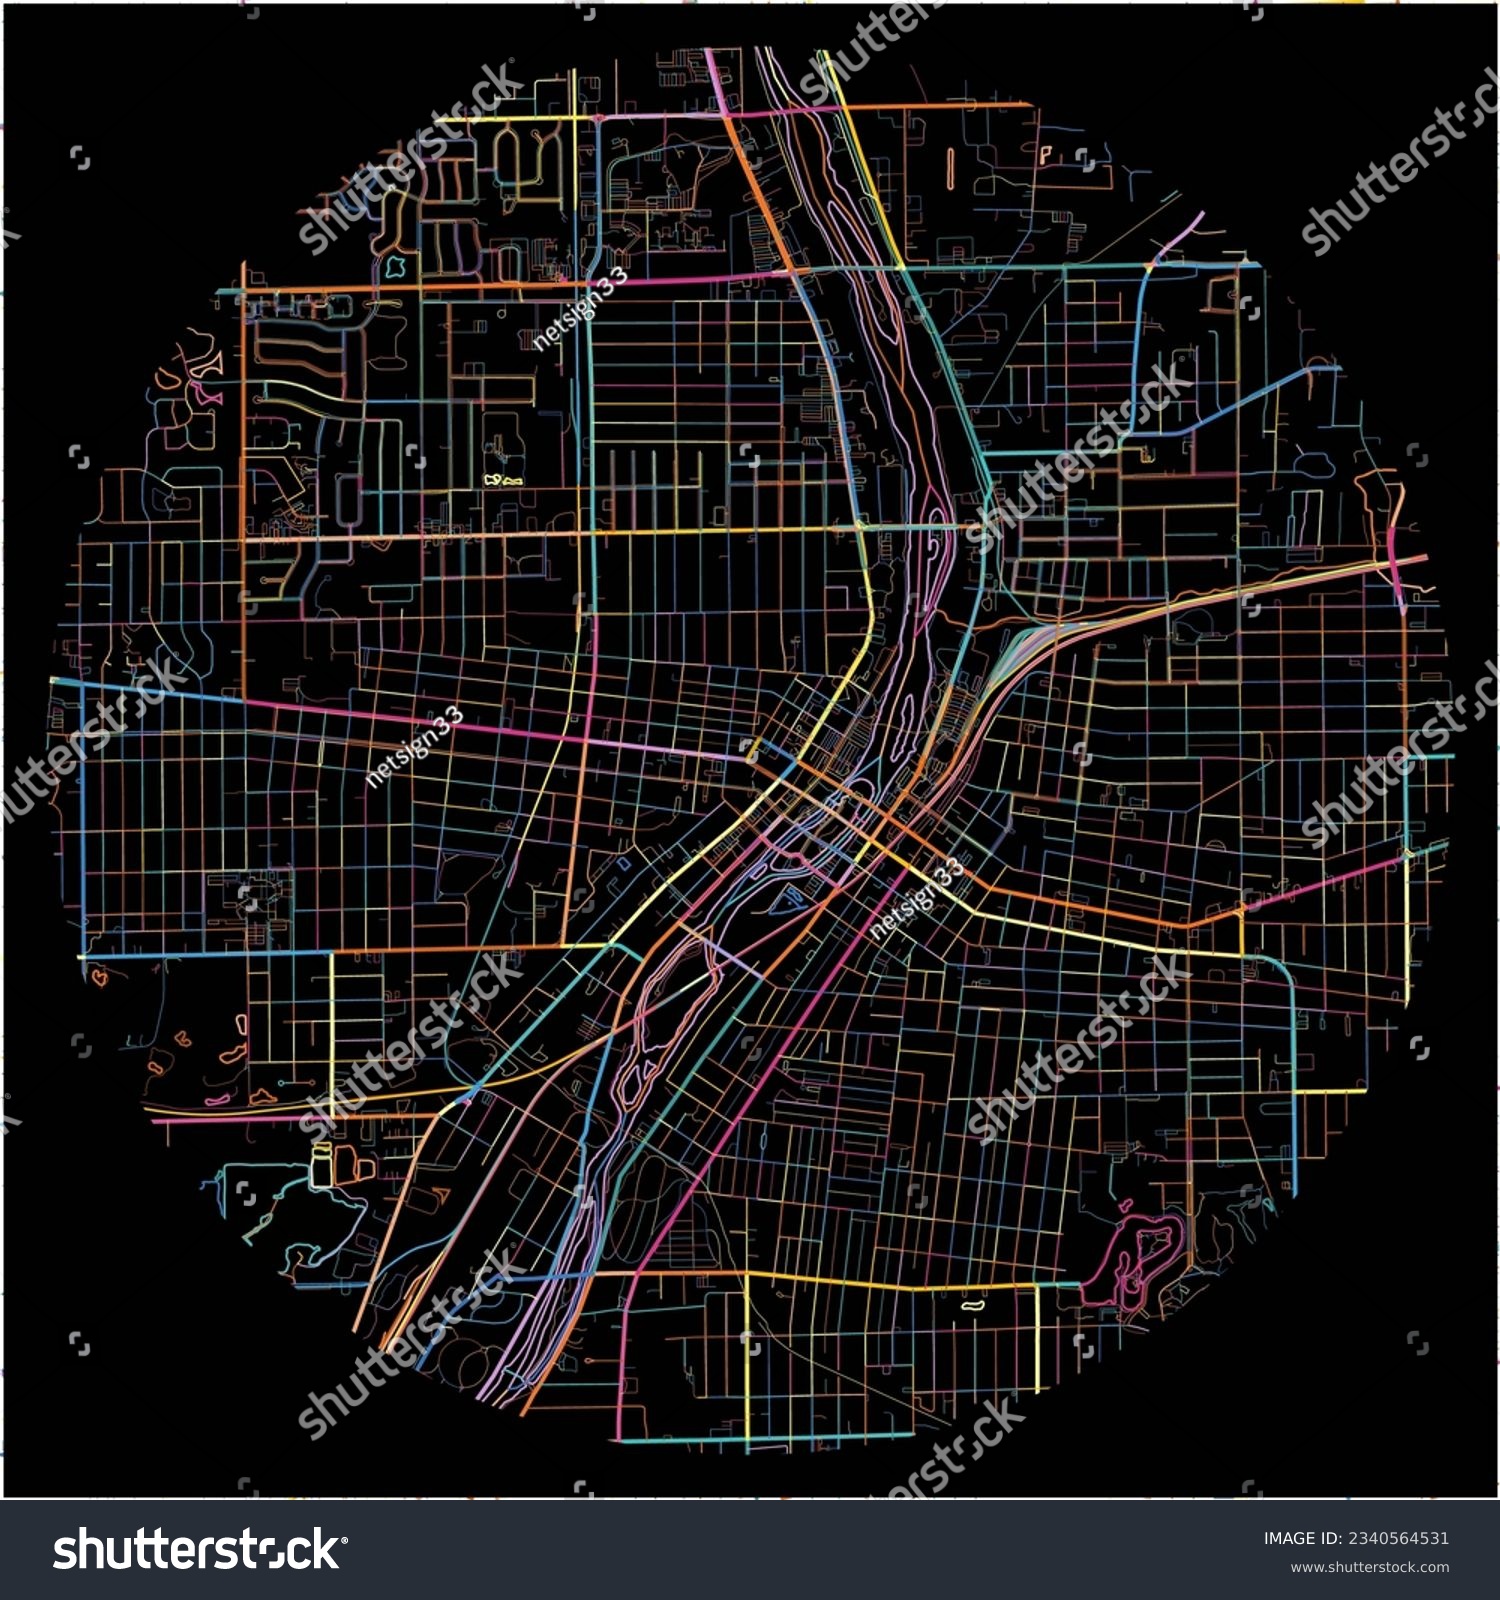 SVG of Map of Aurora, Illinois with all major and minor roads, railways and waterways. Colorful line art on black background. svg